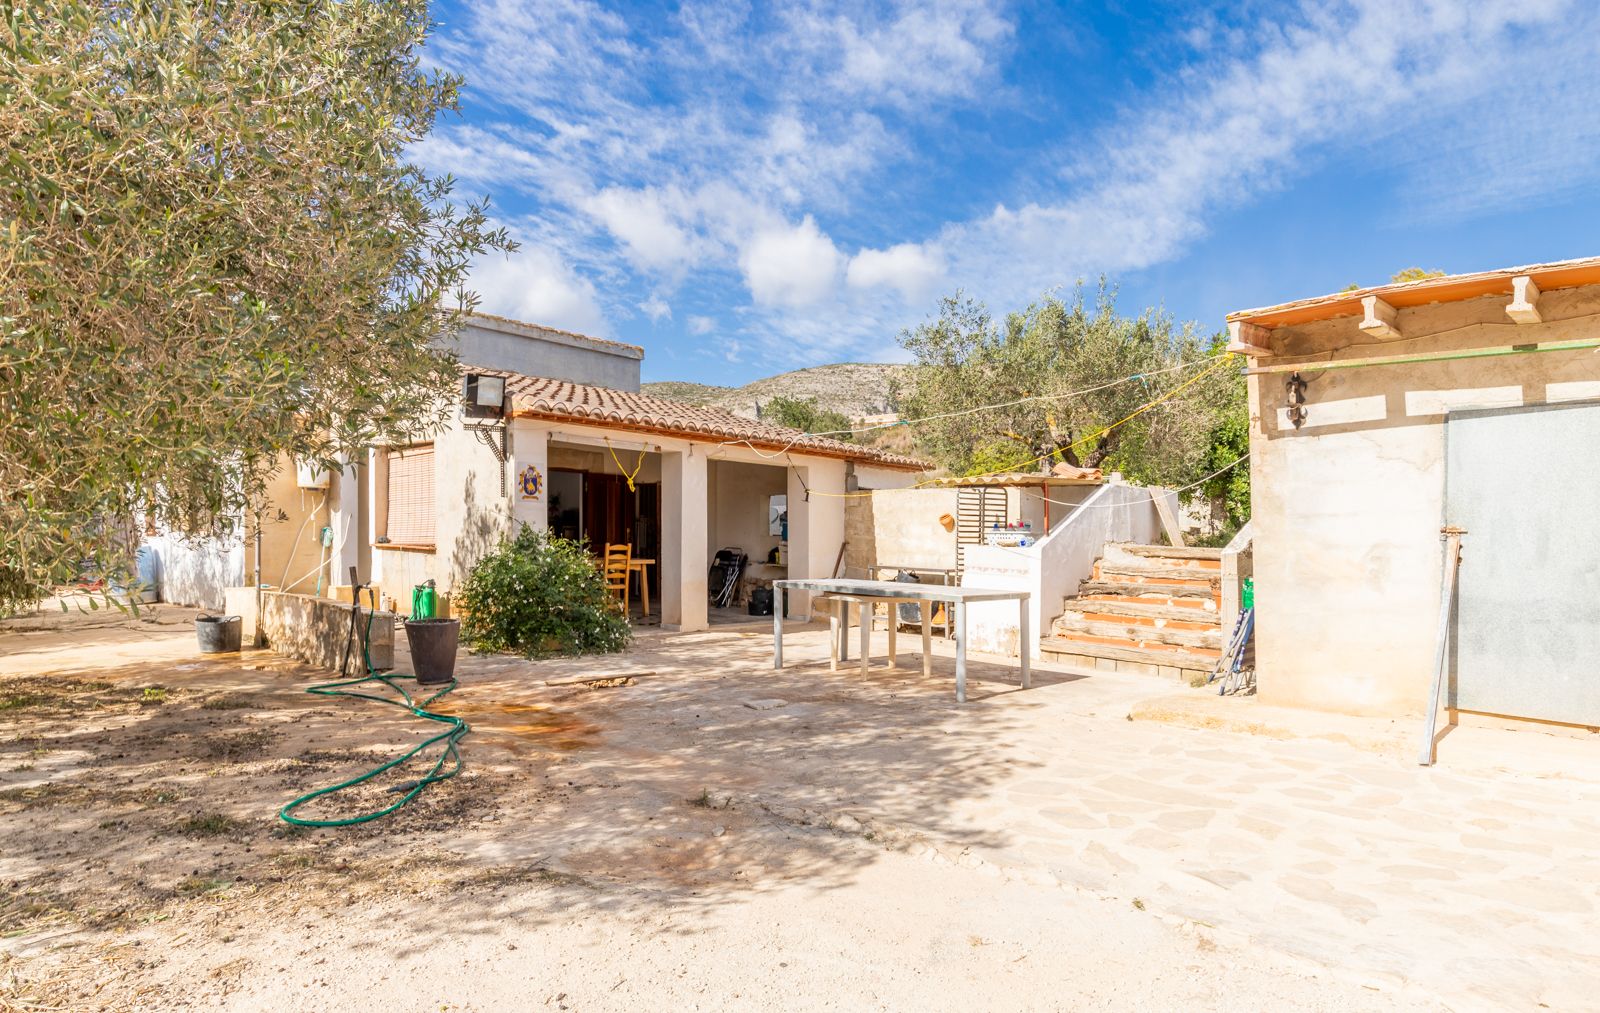 Investment opportunity, active equestrian center for sale in Teulada